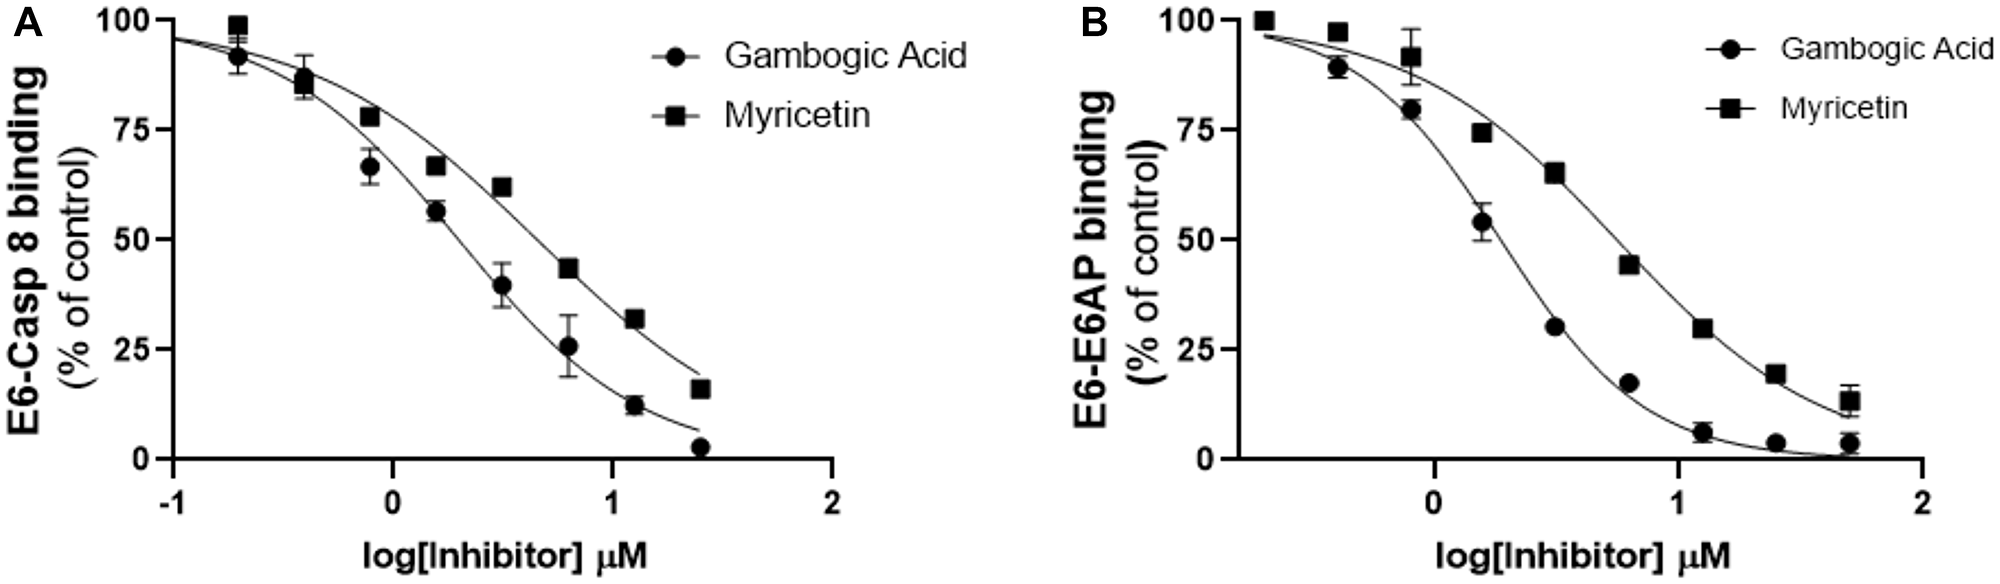 Follow-up characterization of specificity and activity of gambogic acid for E6 binding inhibition.